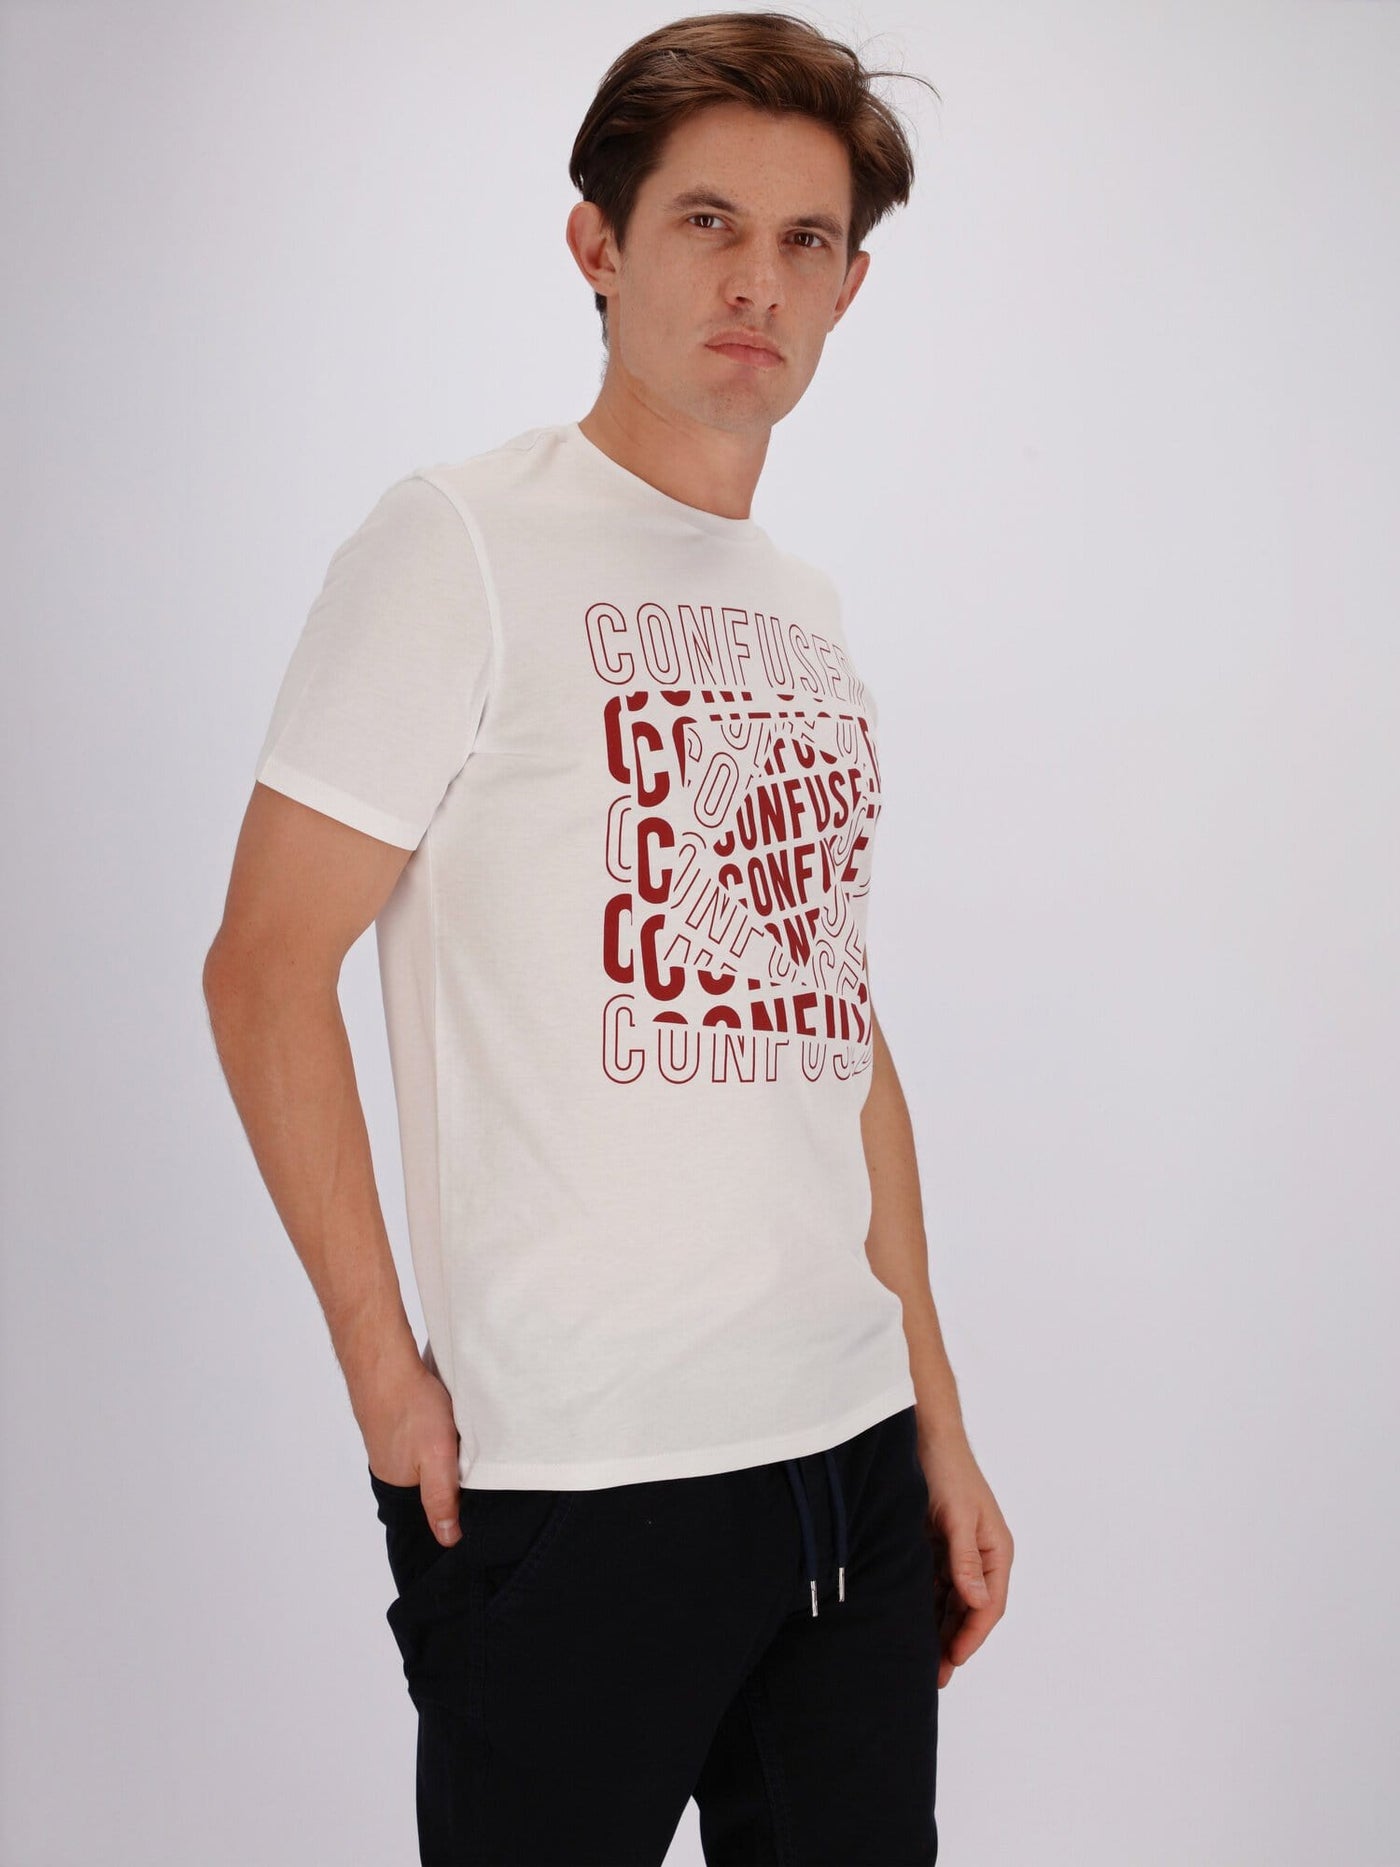 OR T-Shirts Confused Front Print T-Shirt